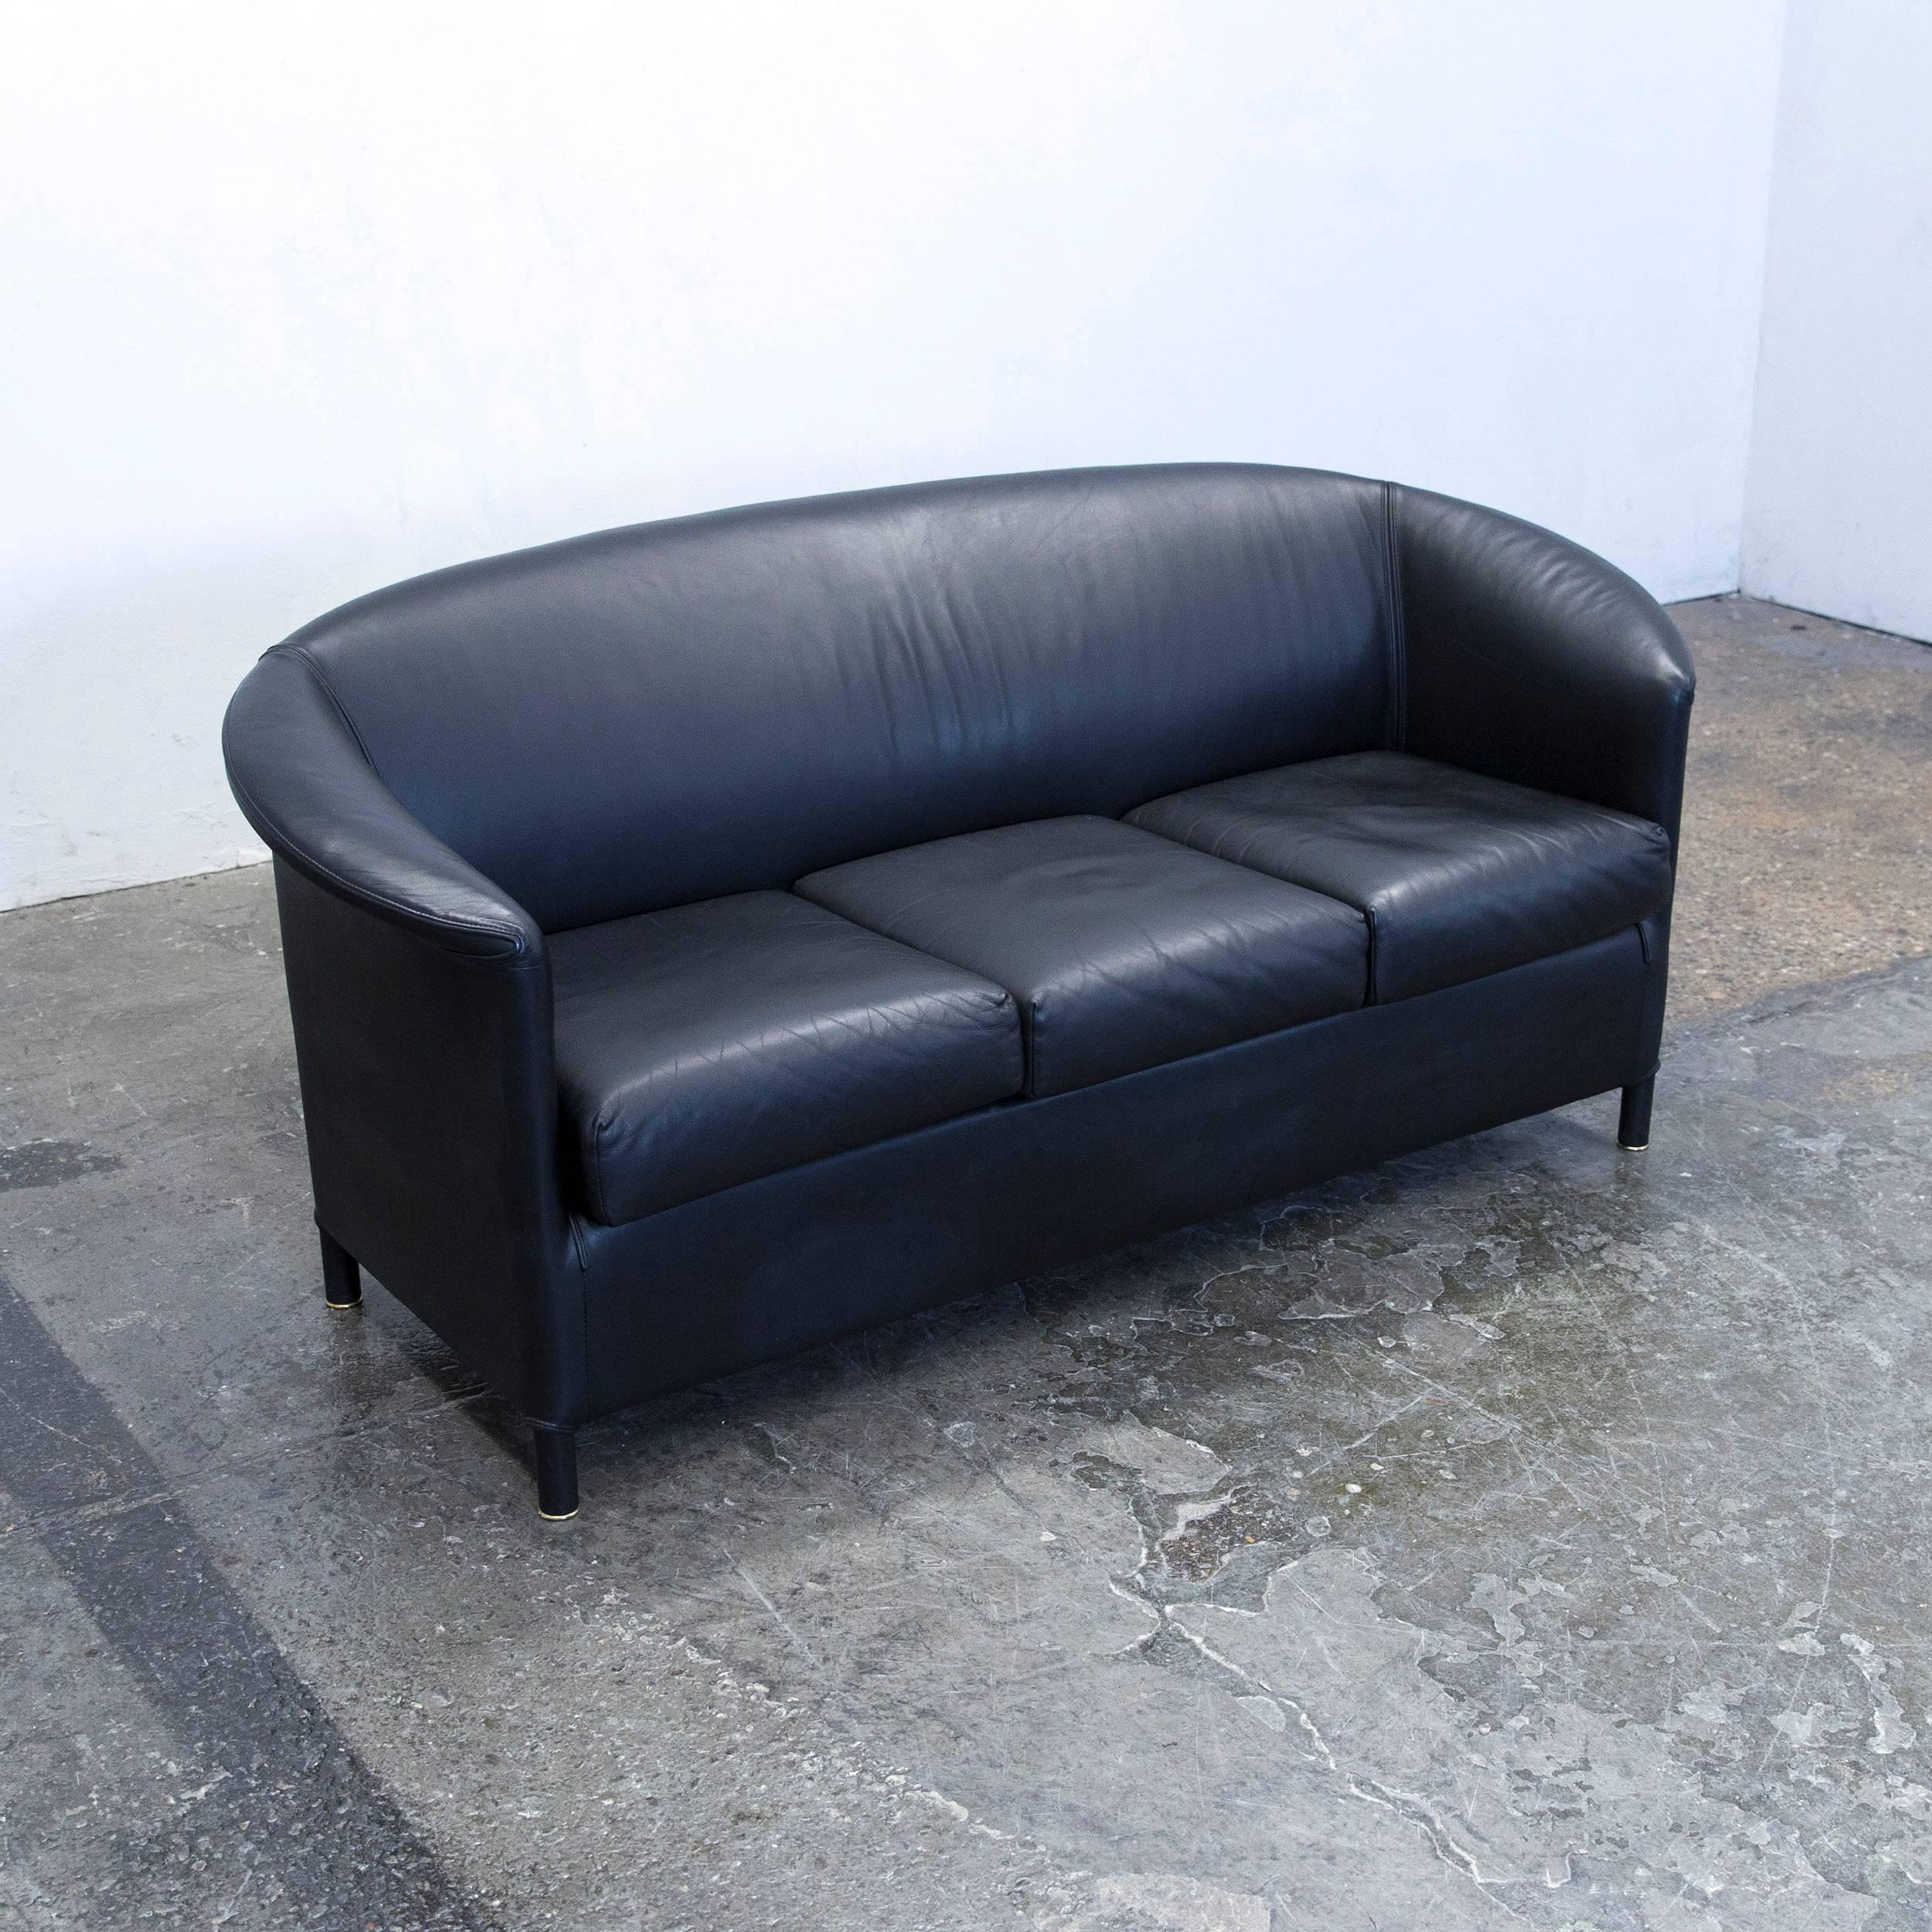 Black colored original Wittmann Aura designer leather sofa, in a minimalistic and modern design, made for pure comfort.